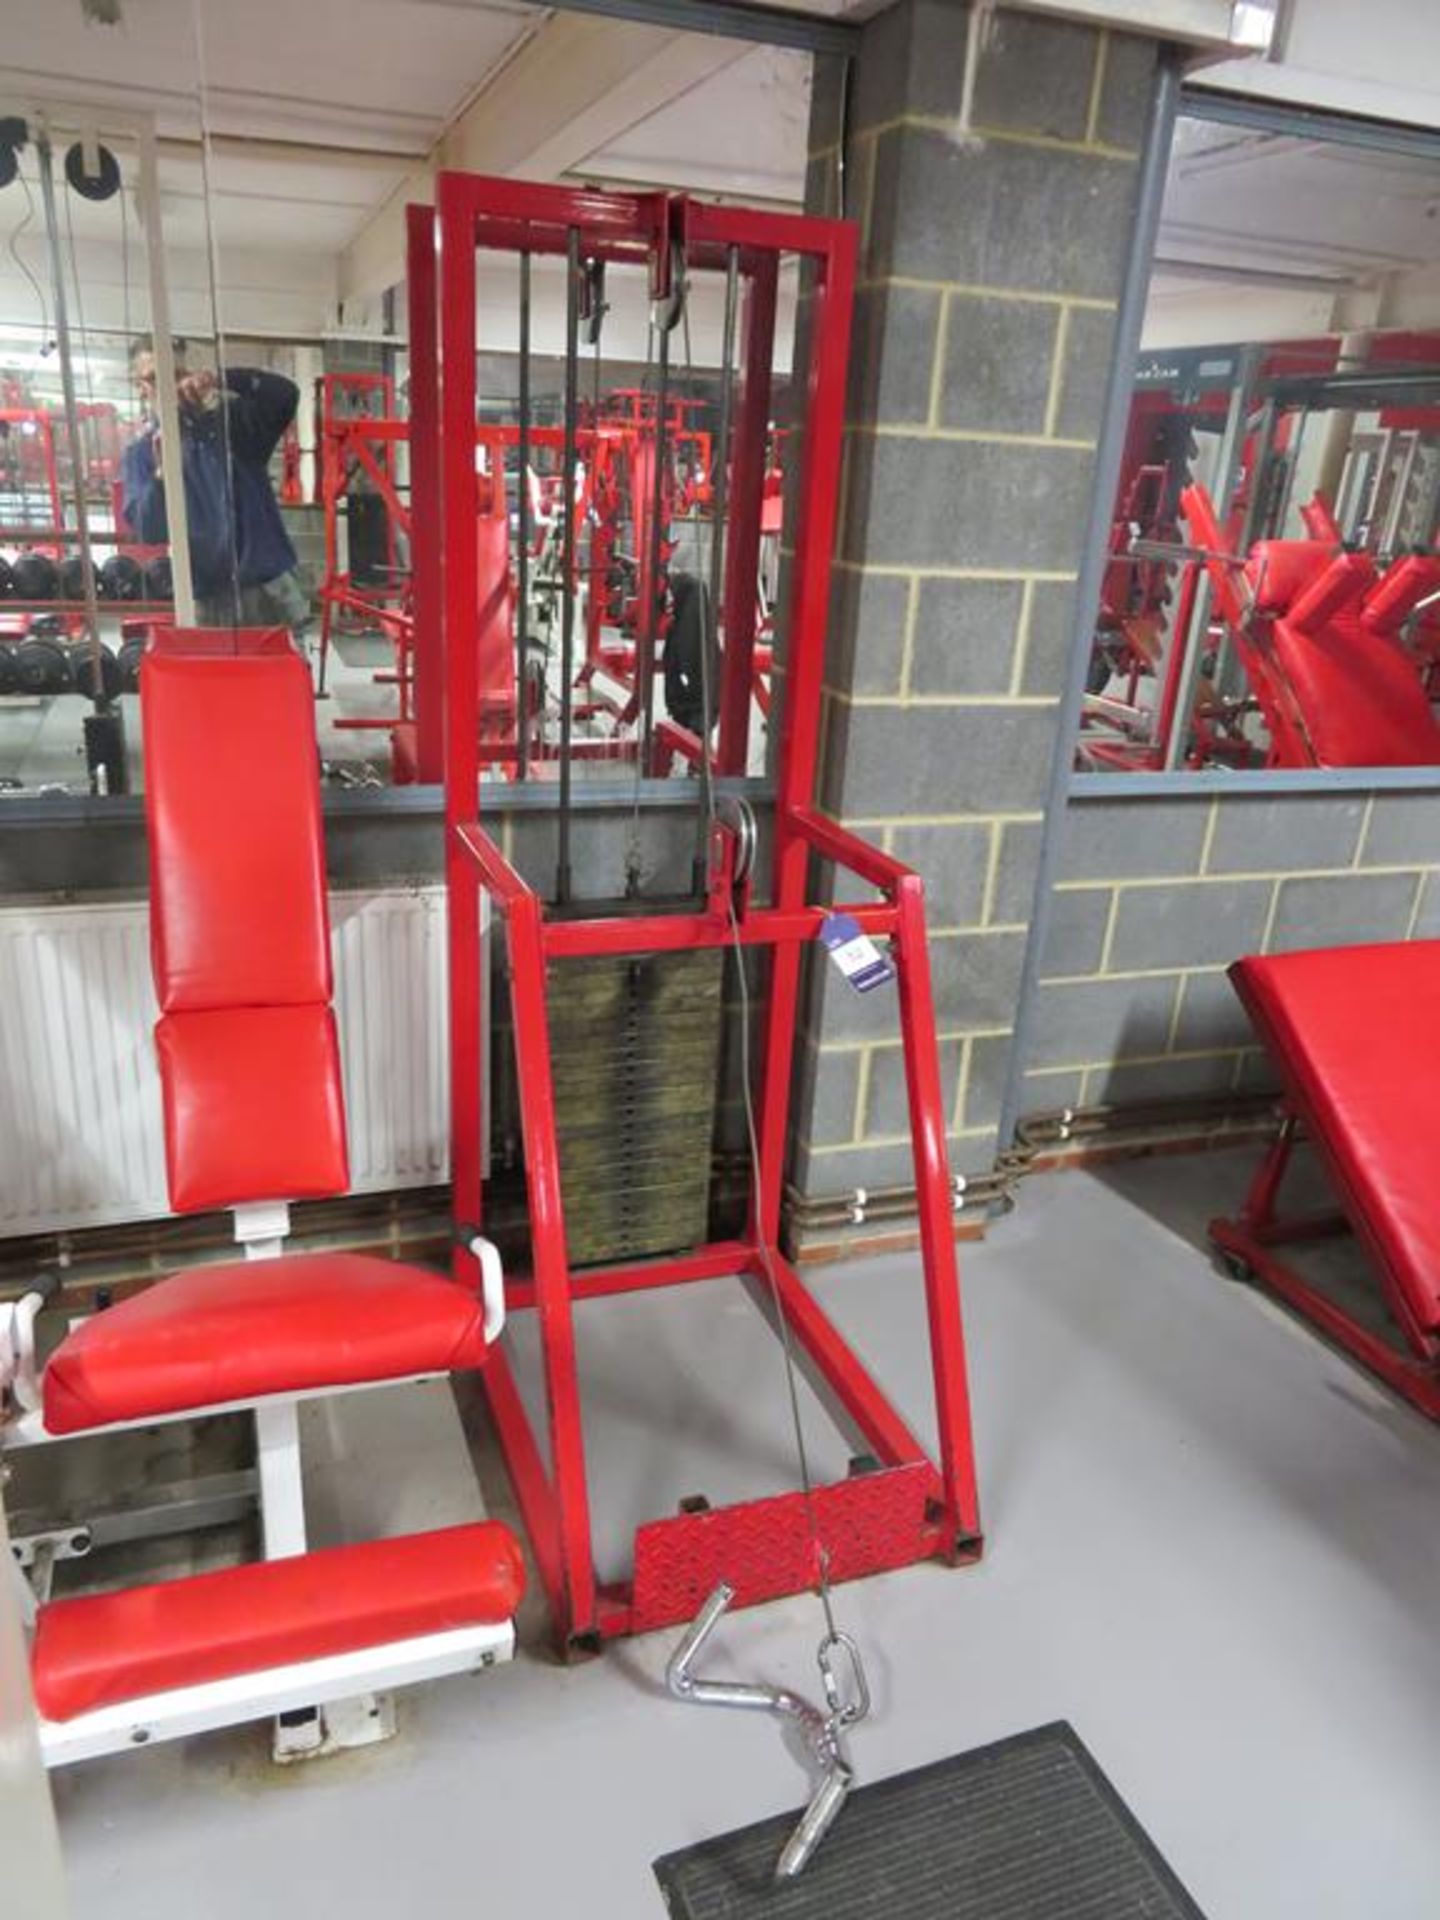 Unbranded Multifunction Cable Pulley Exercise Machine - Image 3 of 3